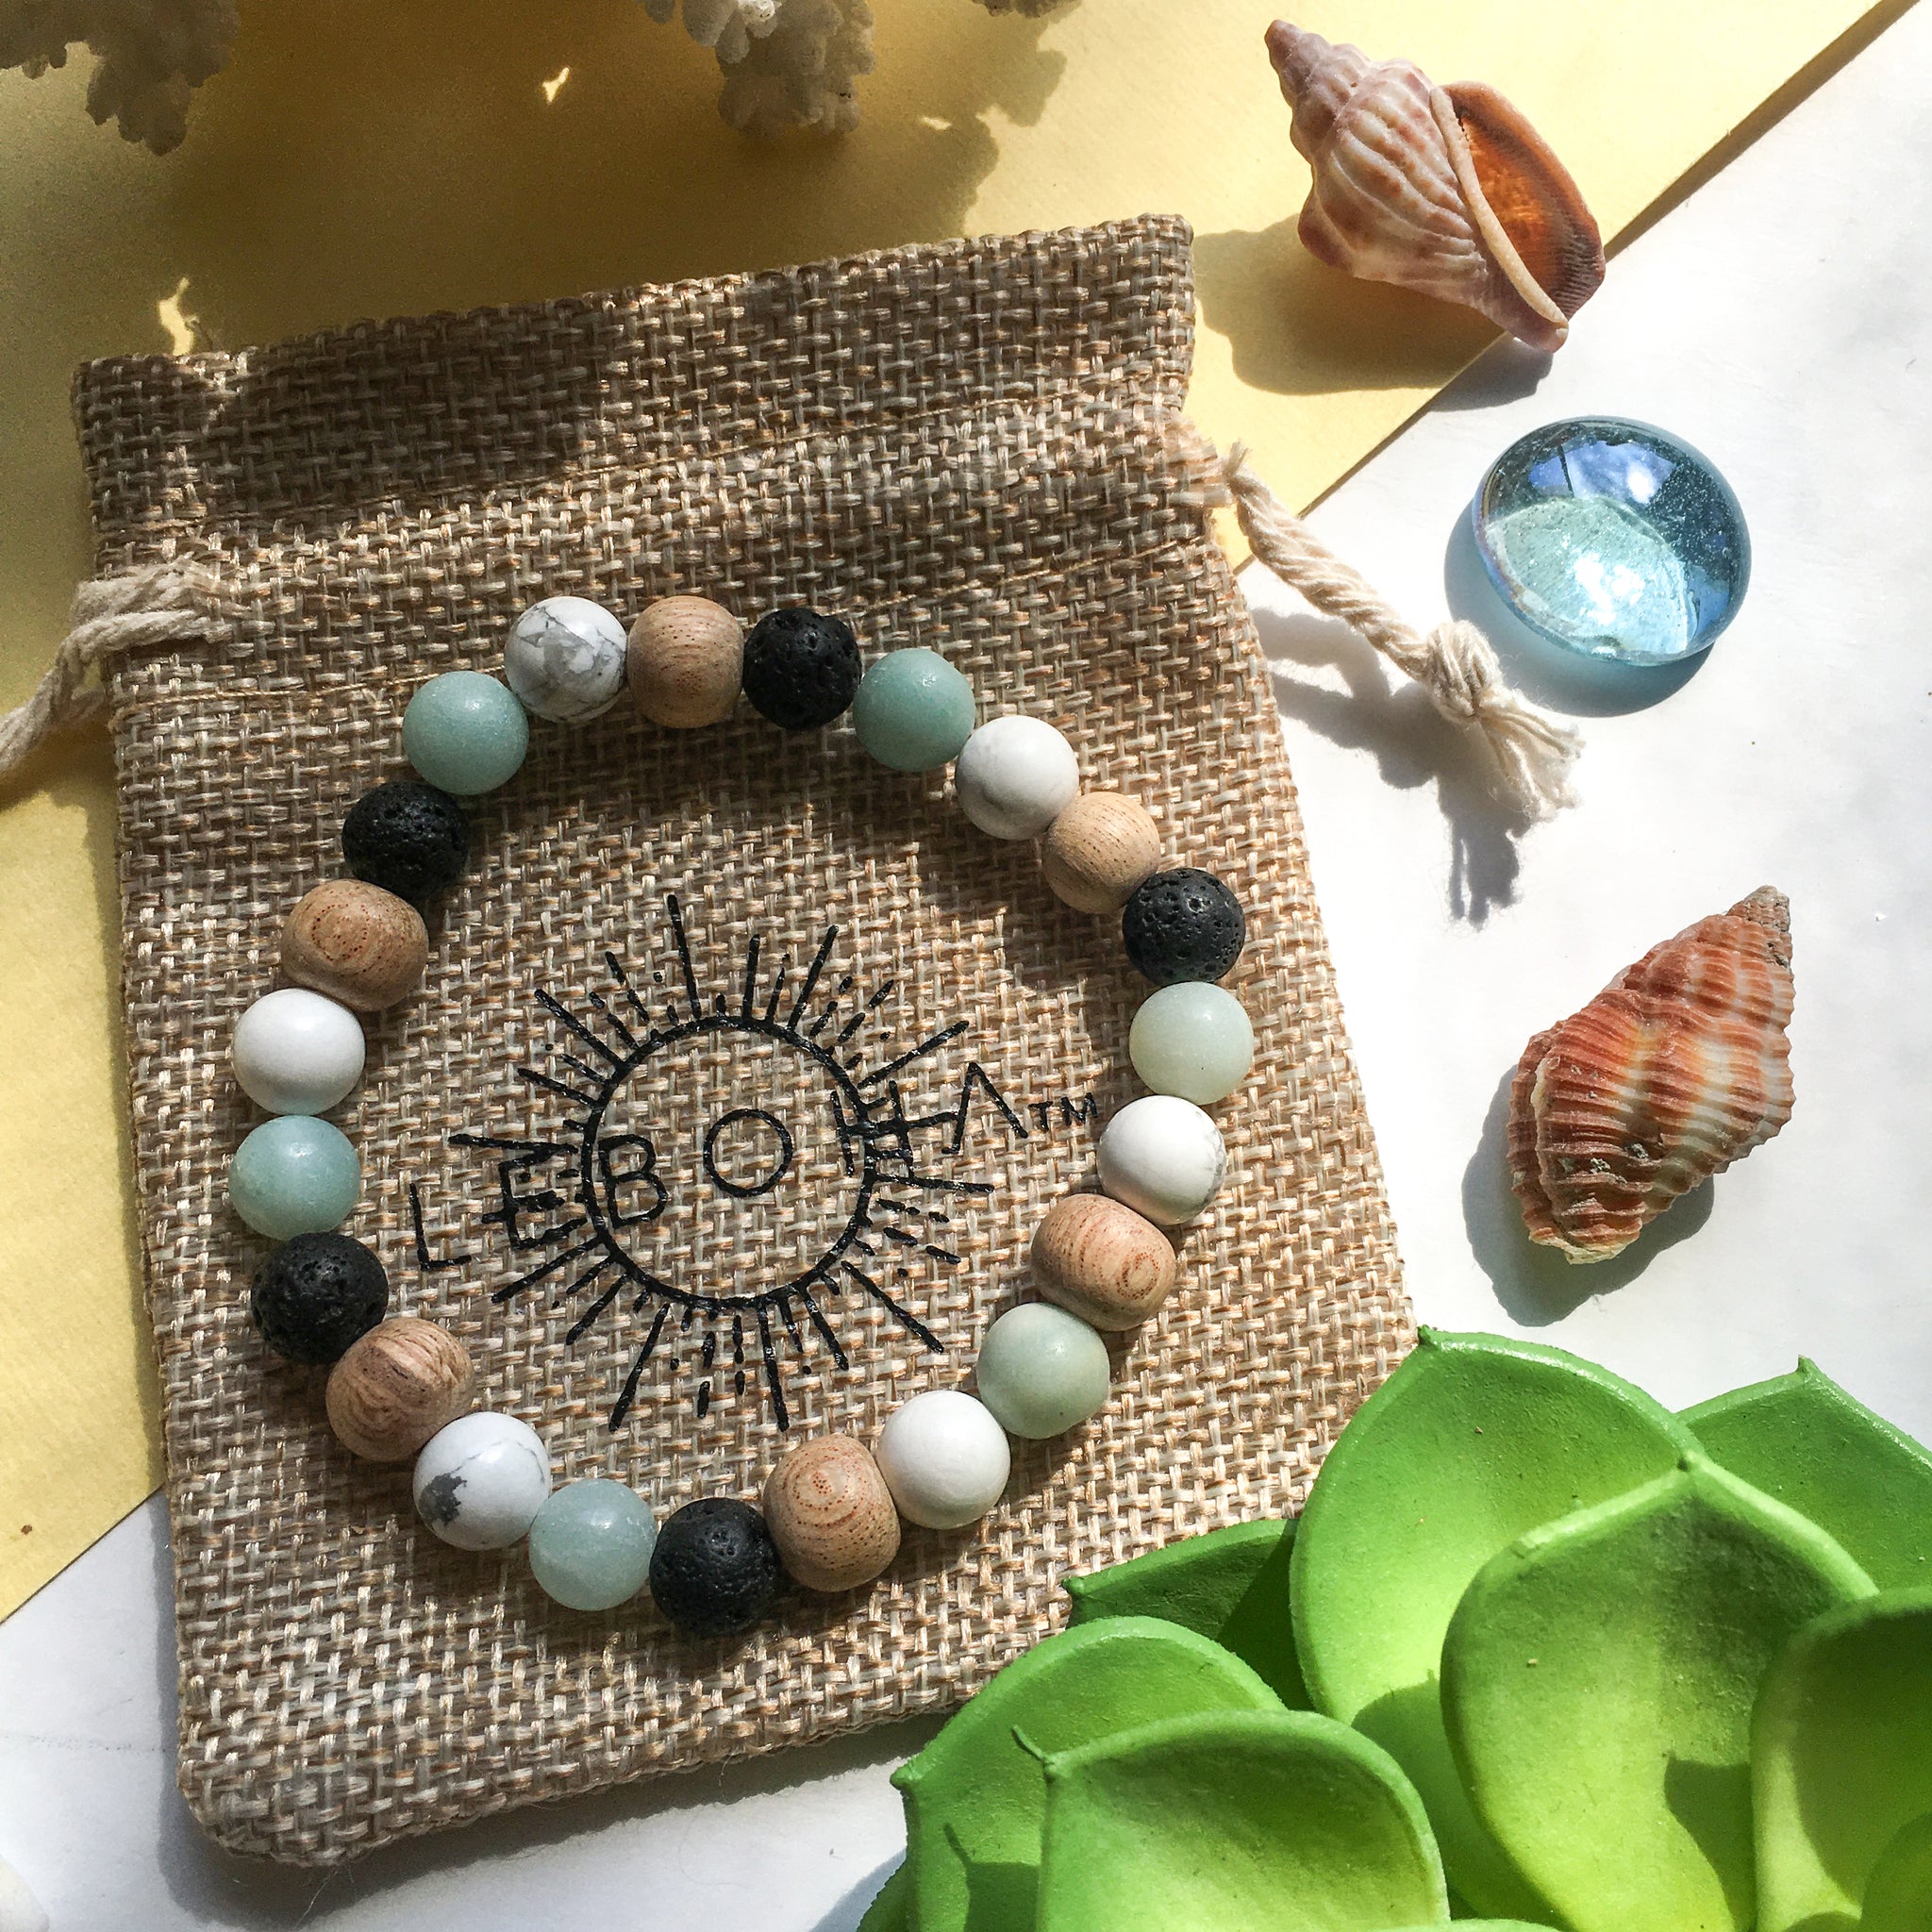 How to Use a Chakra Essential Oil Bracelet to Become Balanced